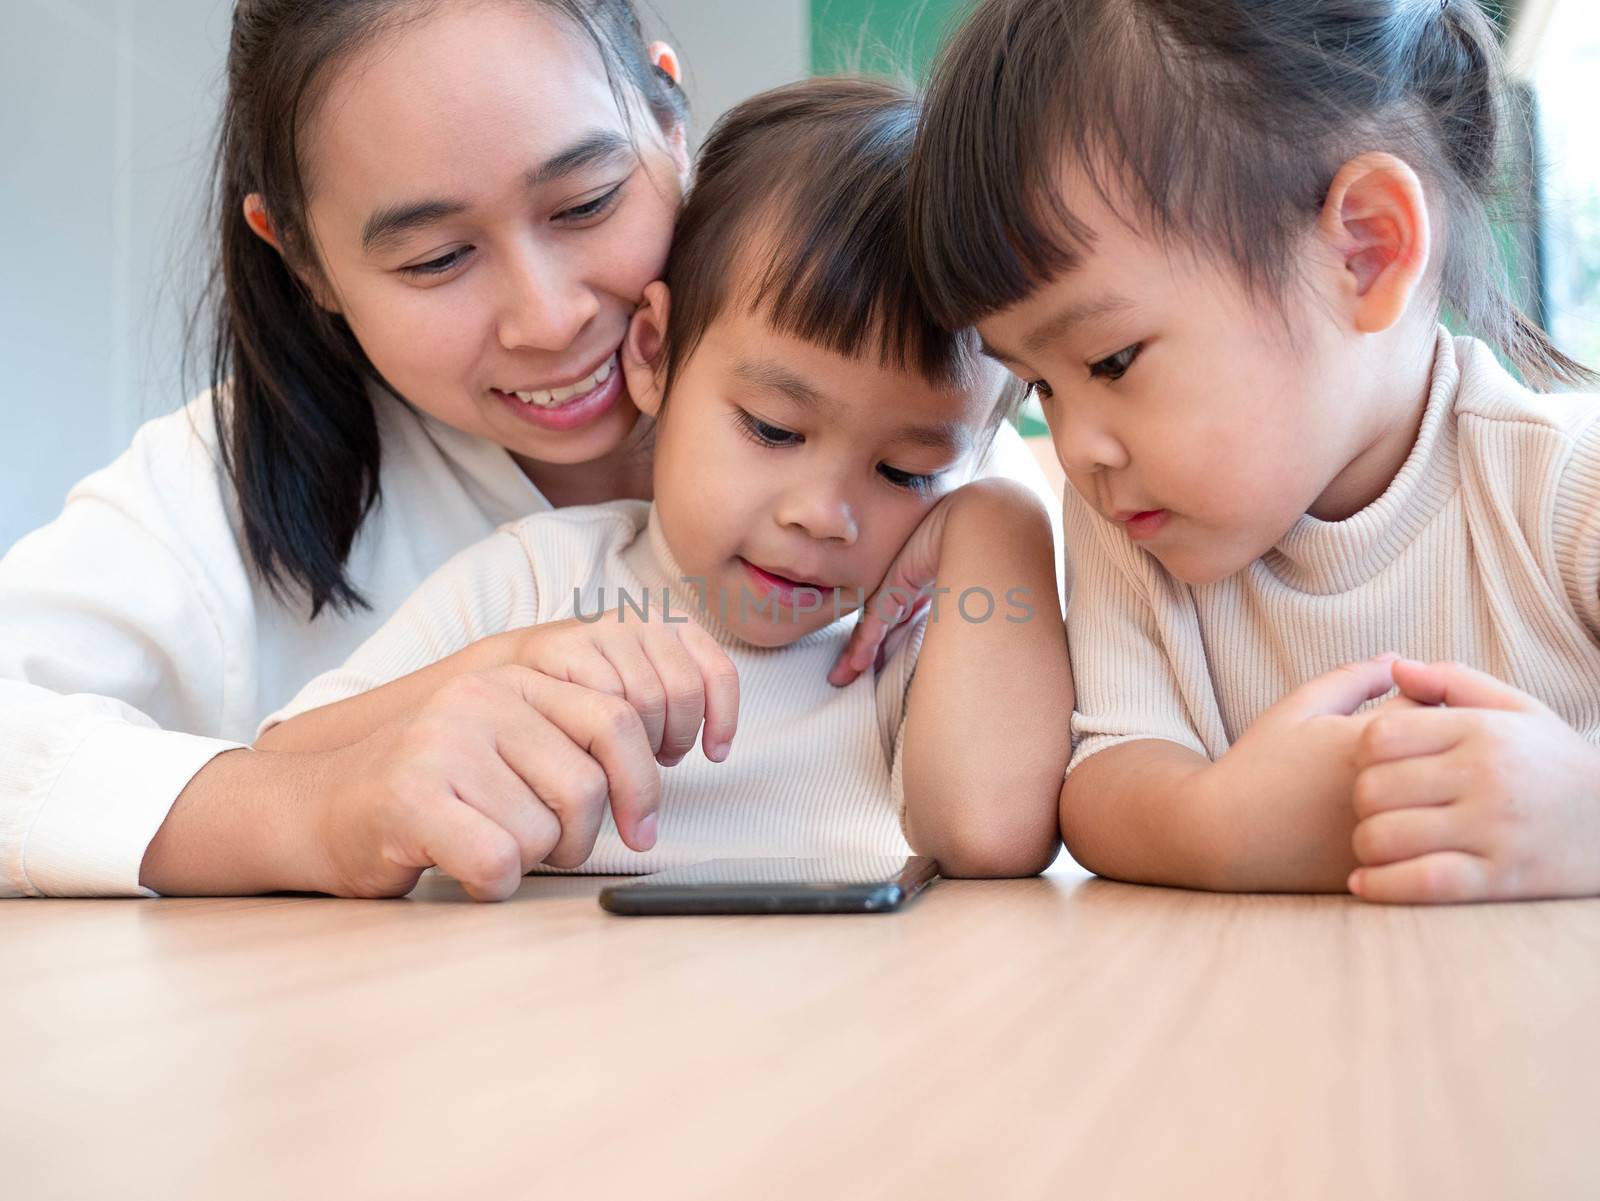 Asian beautiful young mother and her little daughters are enjoying playing games or entertaining using mobile apps on phone at home.